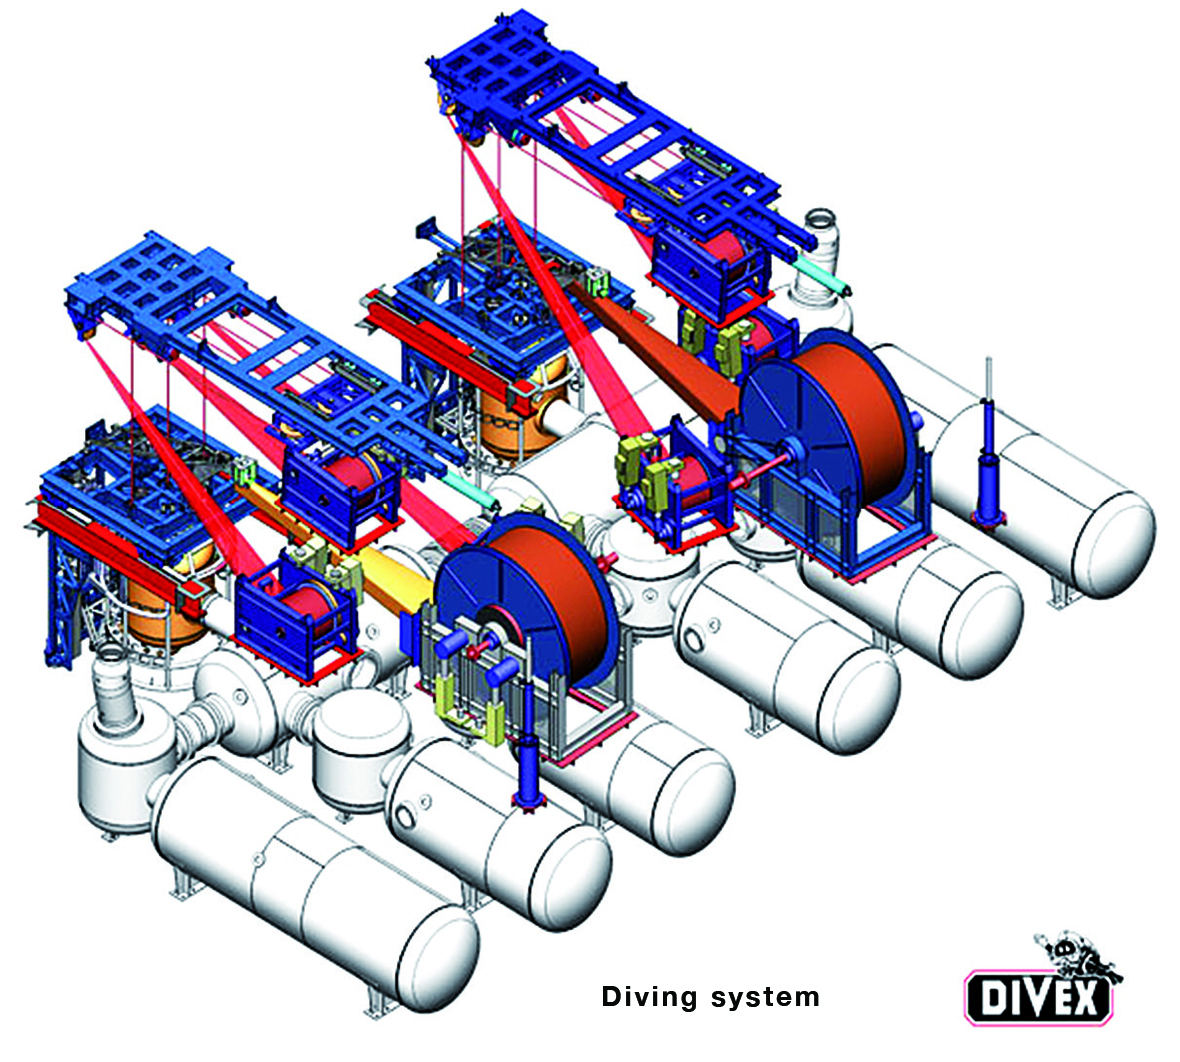 Diving system